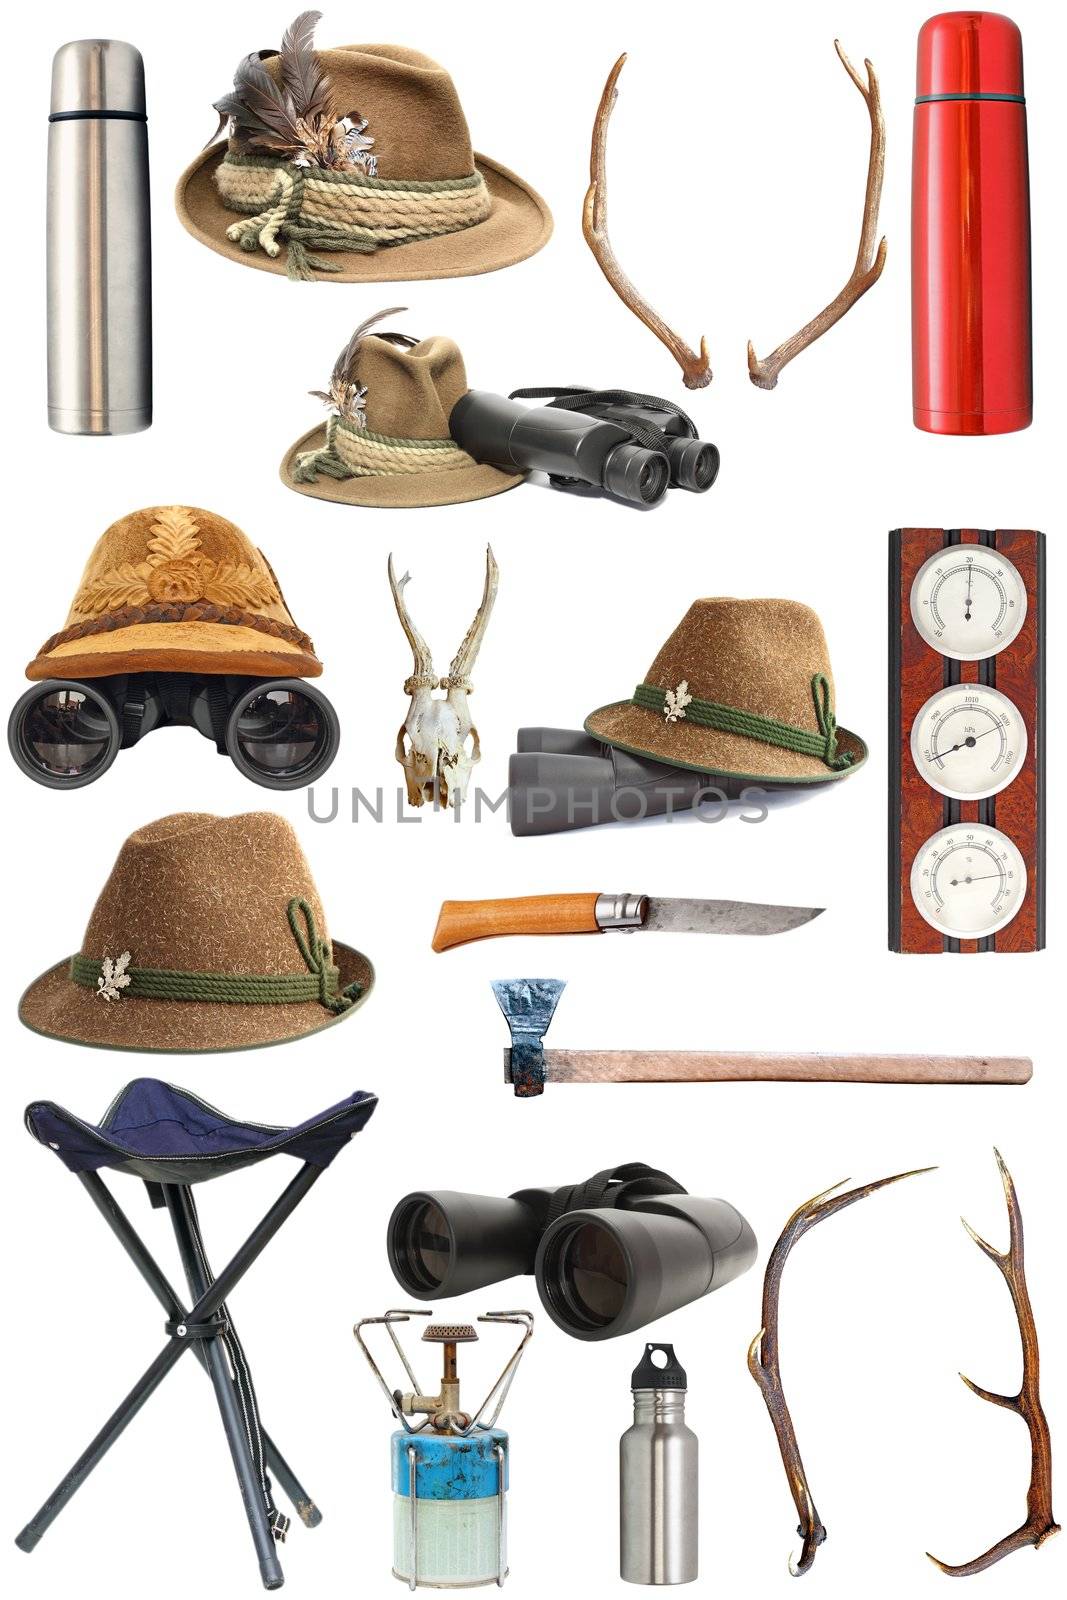 large collection of hunting and outdoor traditional equipment over white background